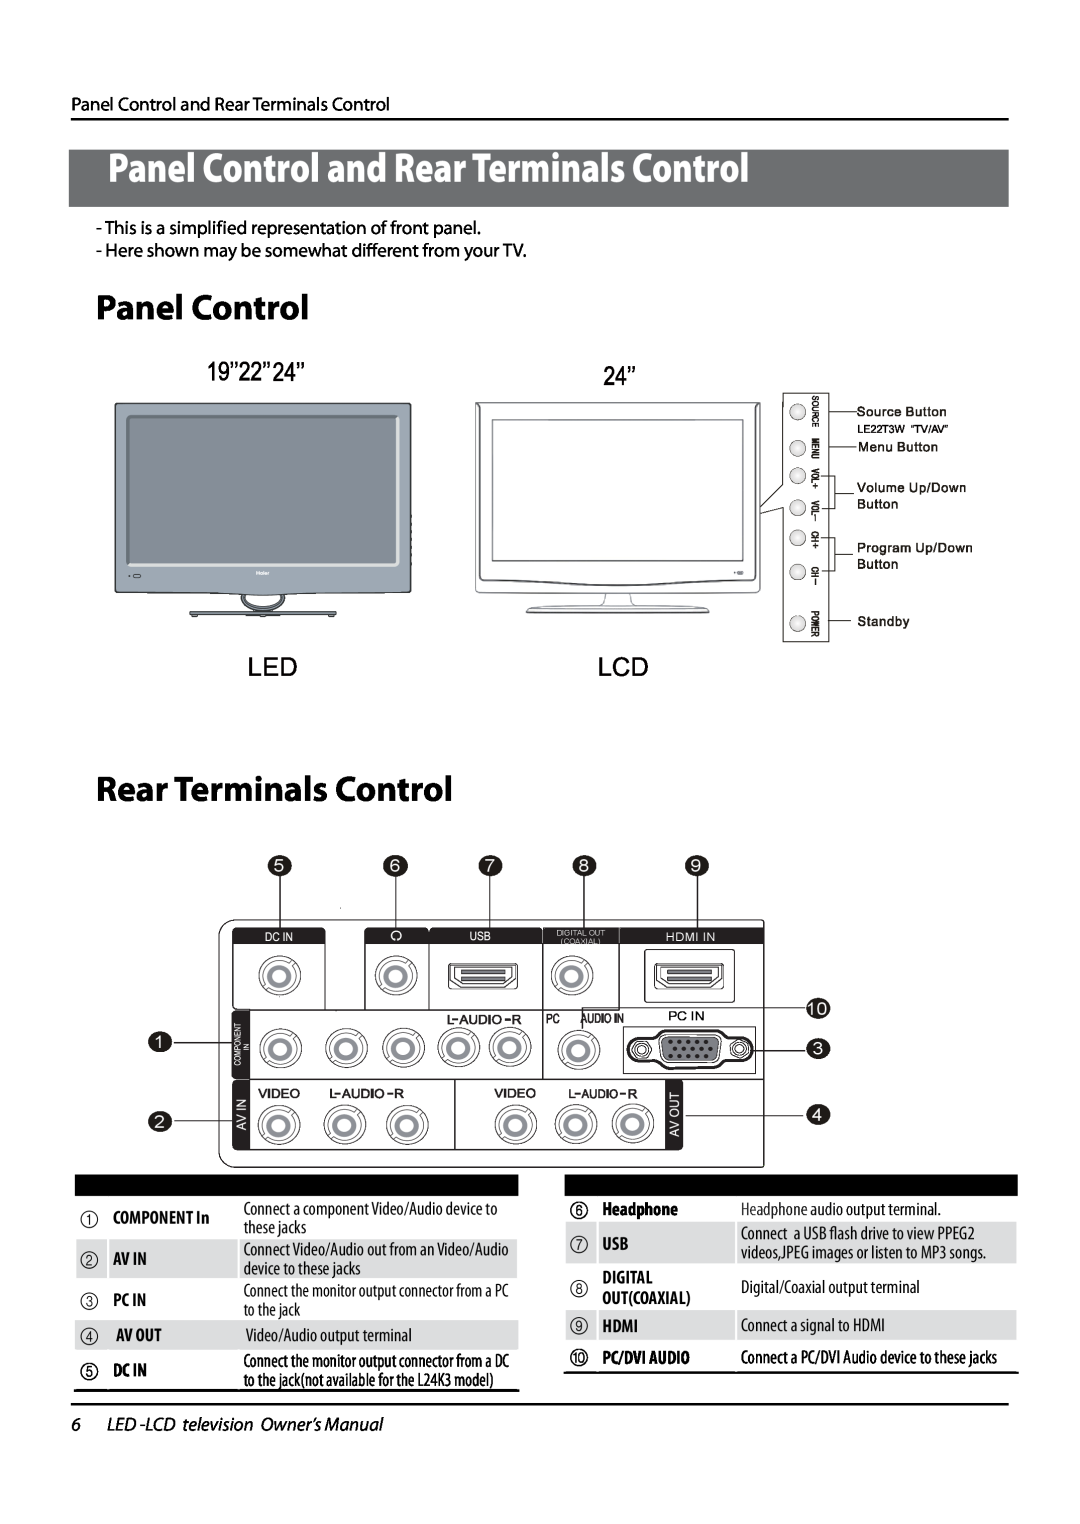 Haier LE22T3W, LE24T3, LE19T3W Panel Control and Rear Terminals Control, Ledlcd, LED -LCD television Owner’s Manual 